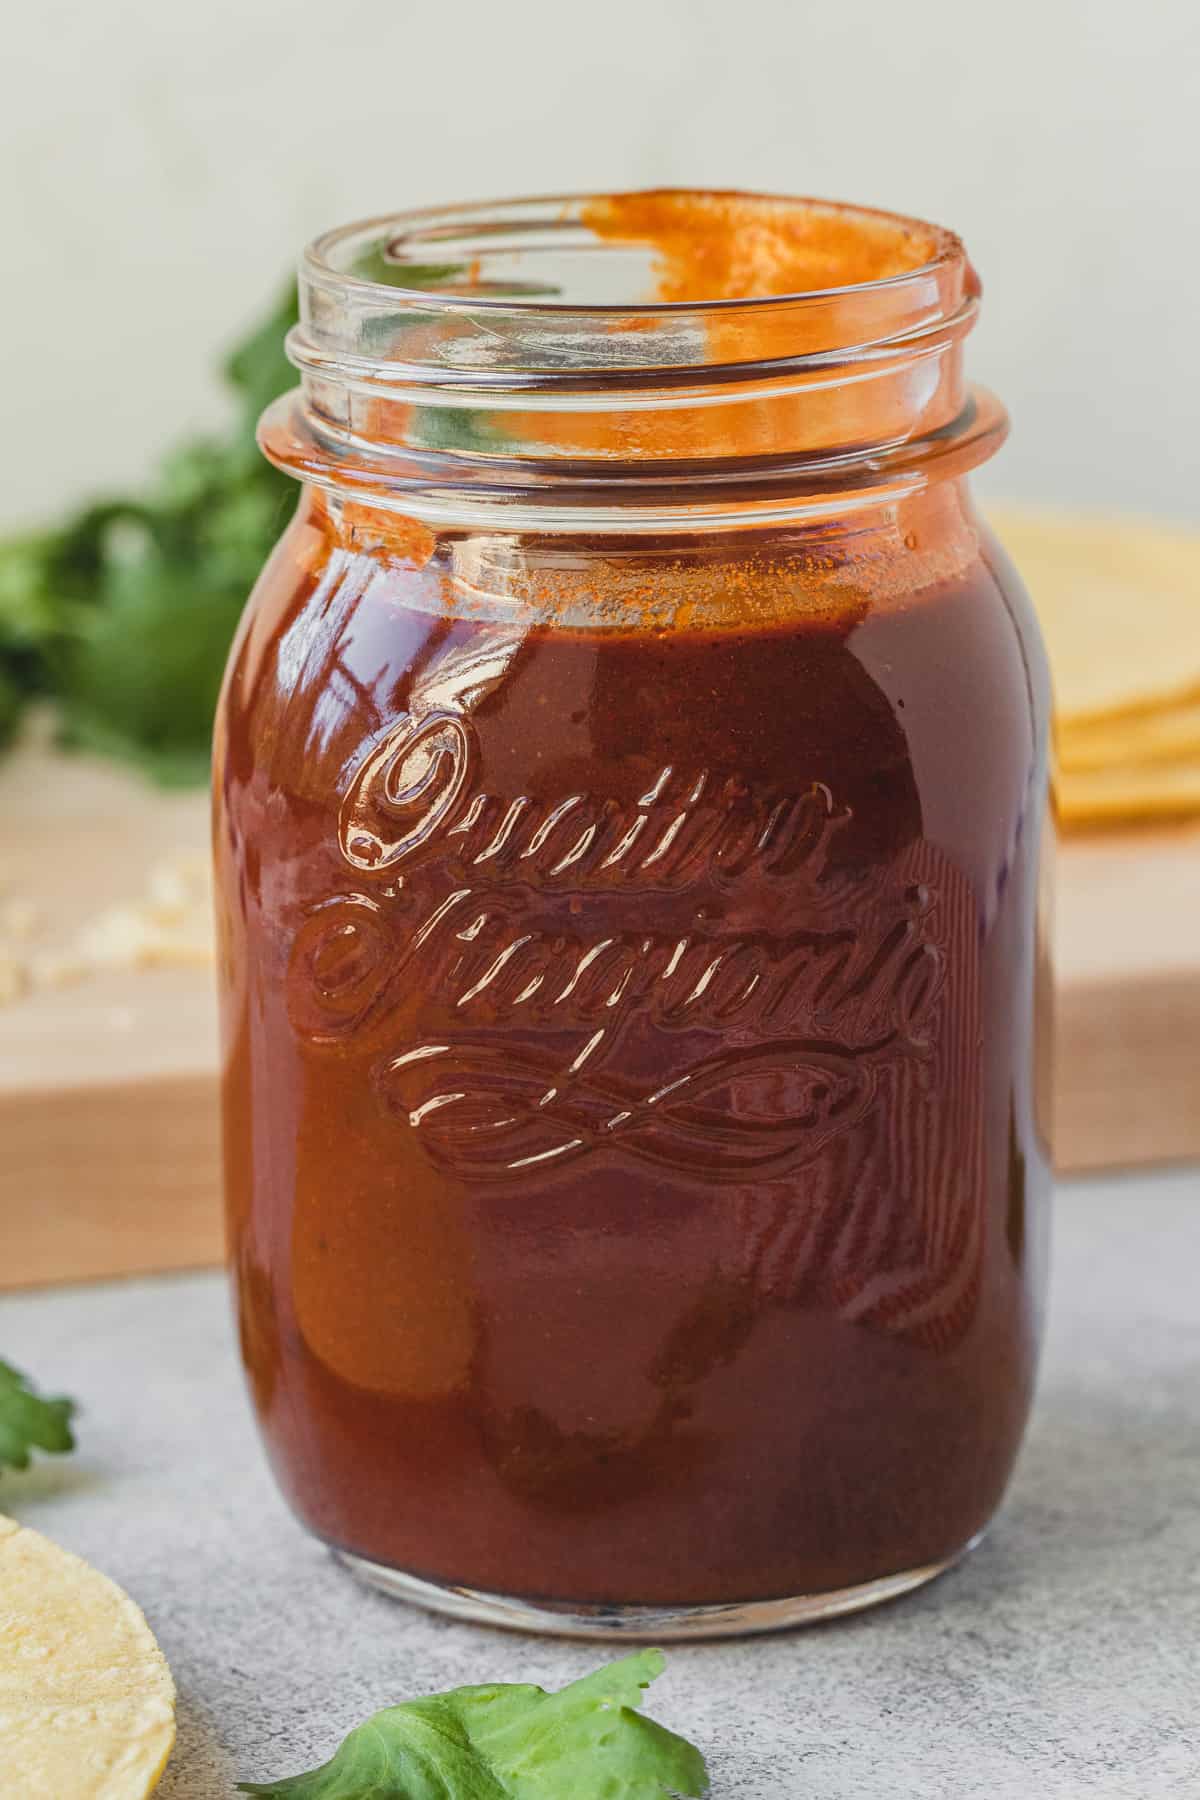 the completed recipe in a glass jar